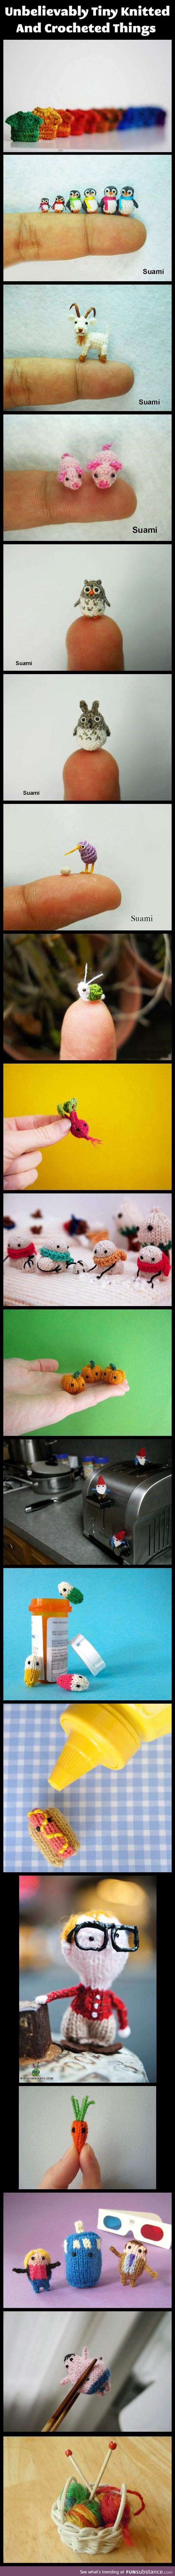 Tiny knitted and crocheted creatures